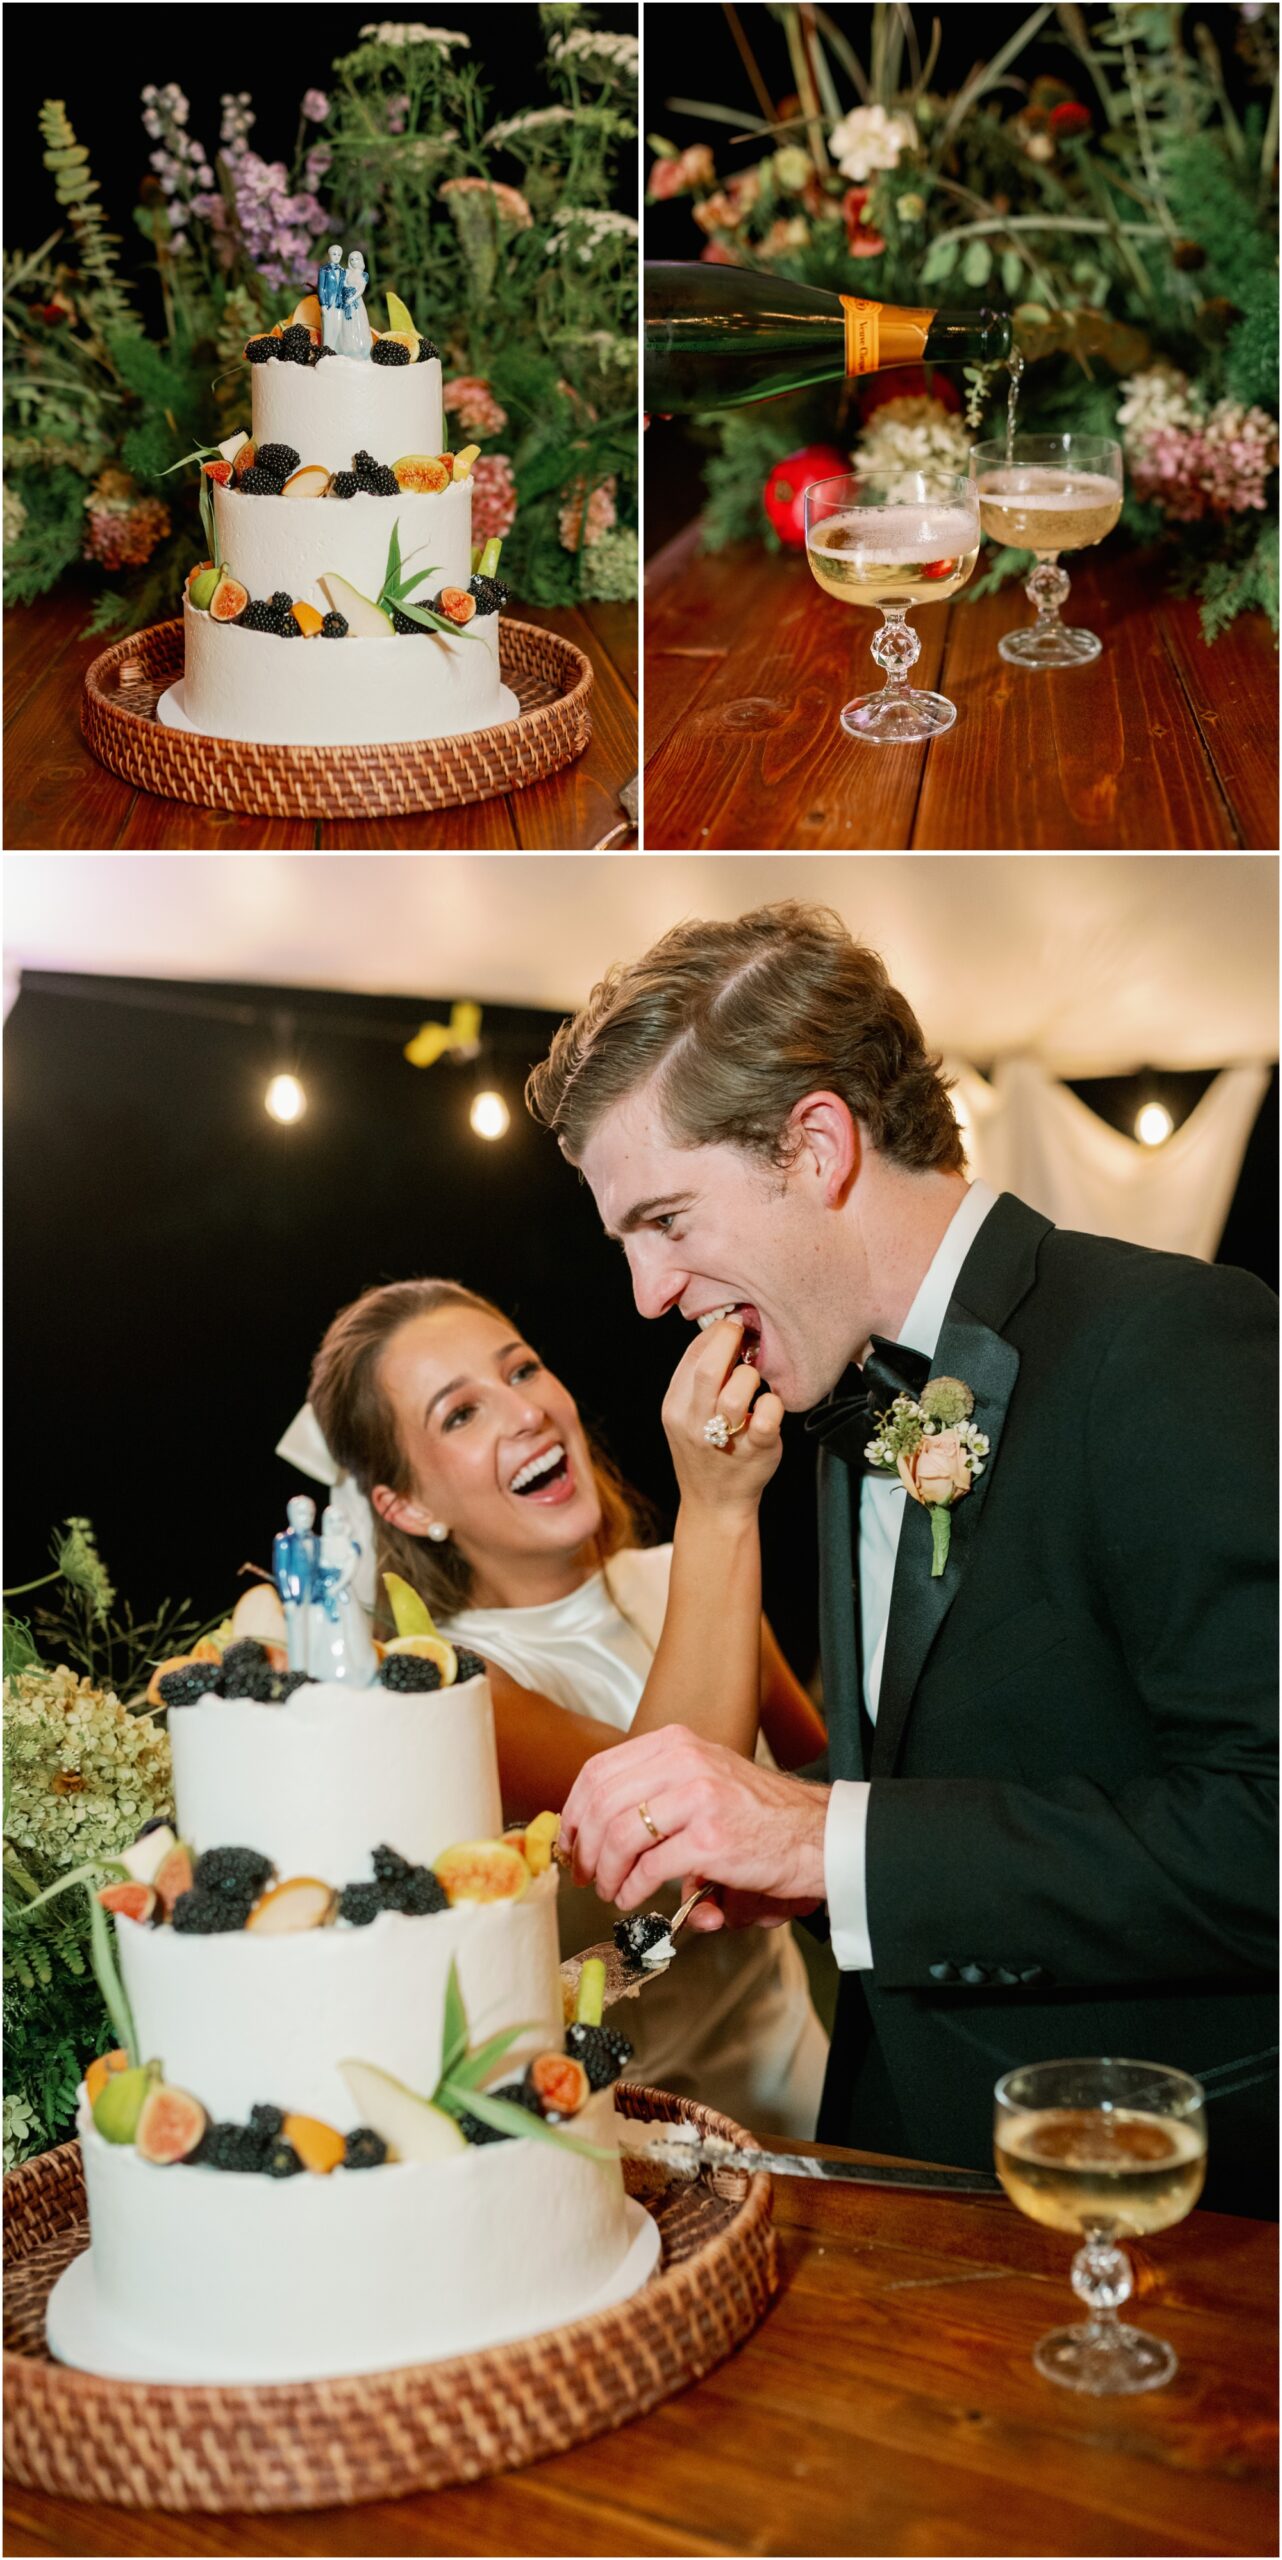 cake cutting at wedding from an elevated backyard wedding in fort worth, Texas